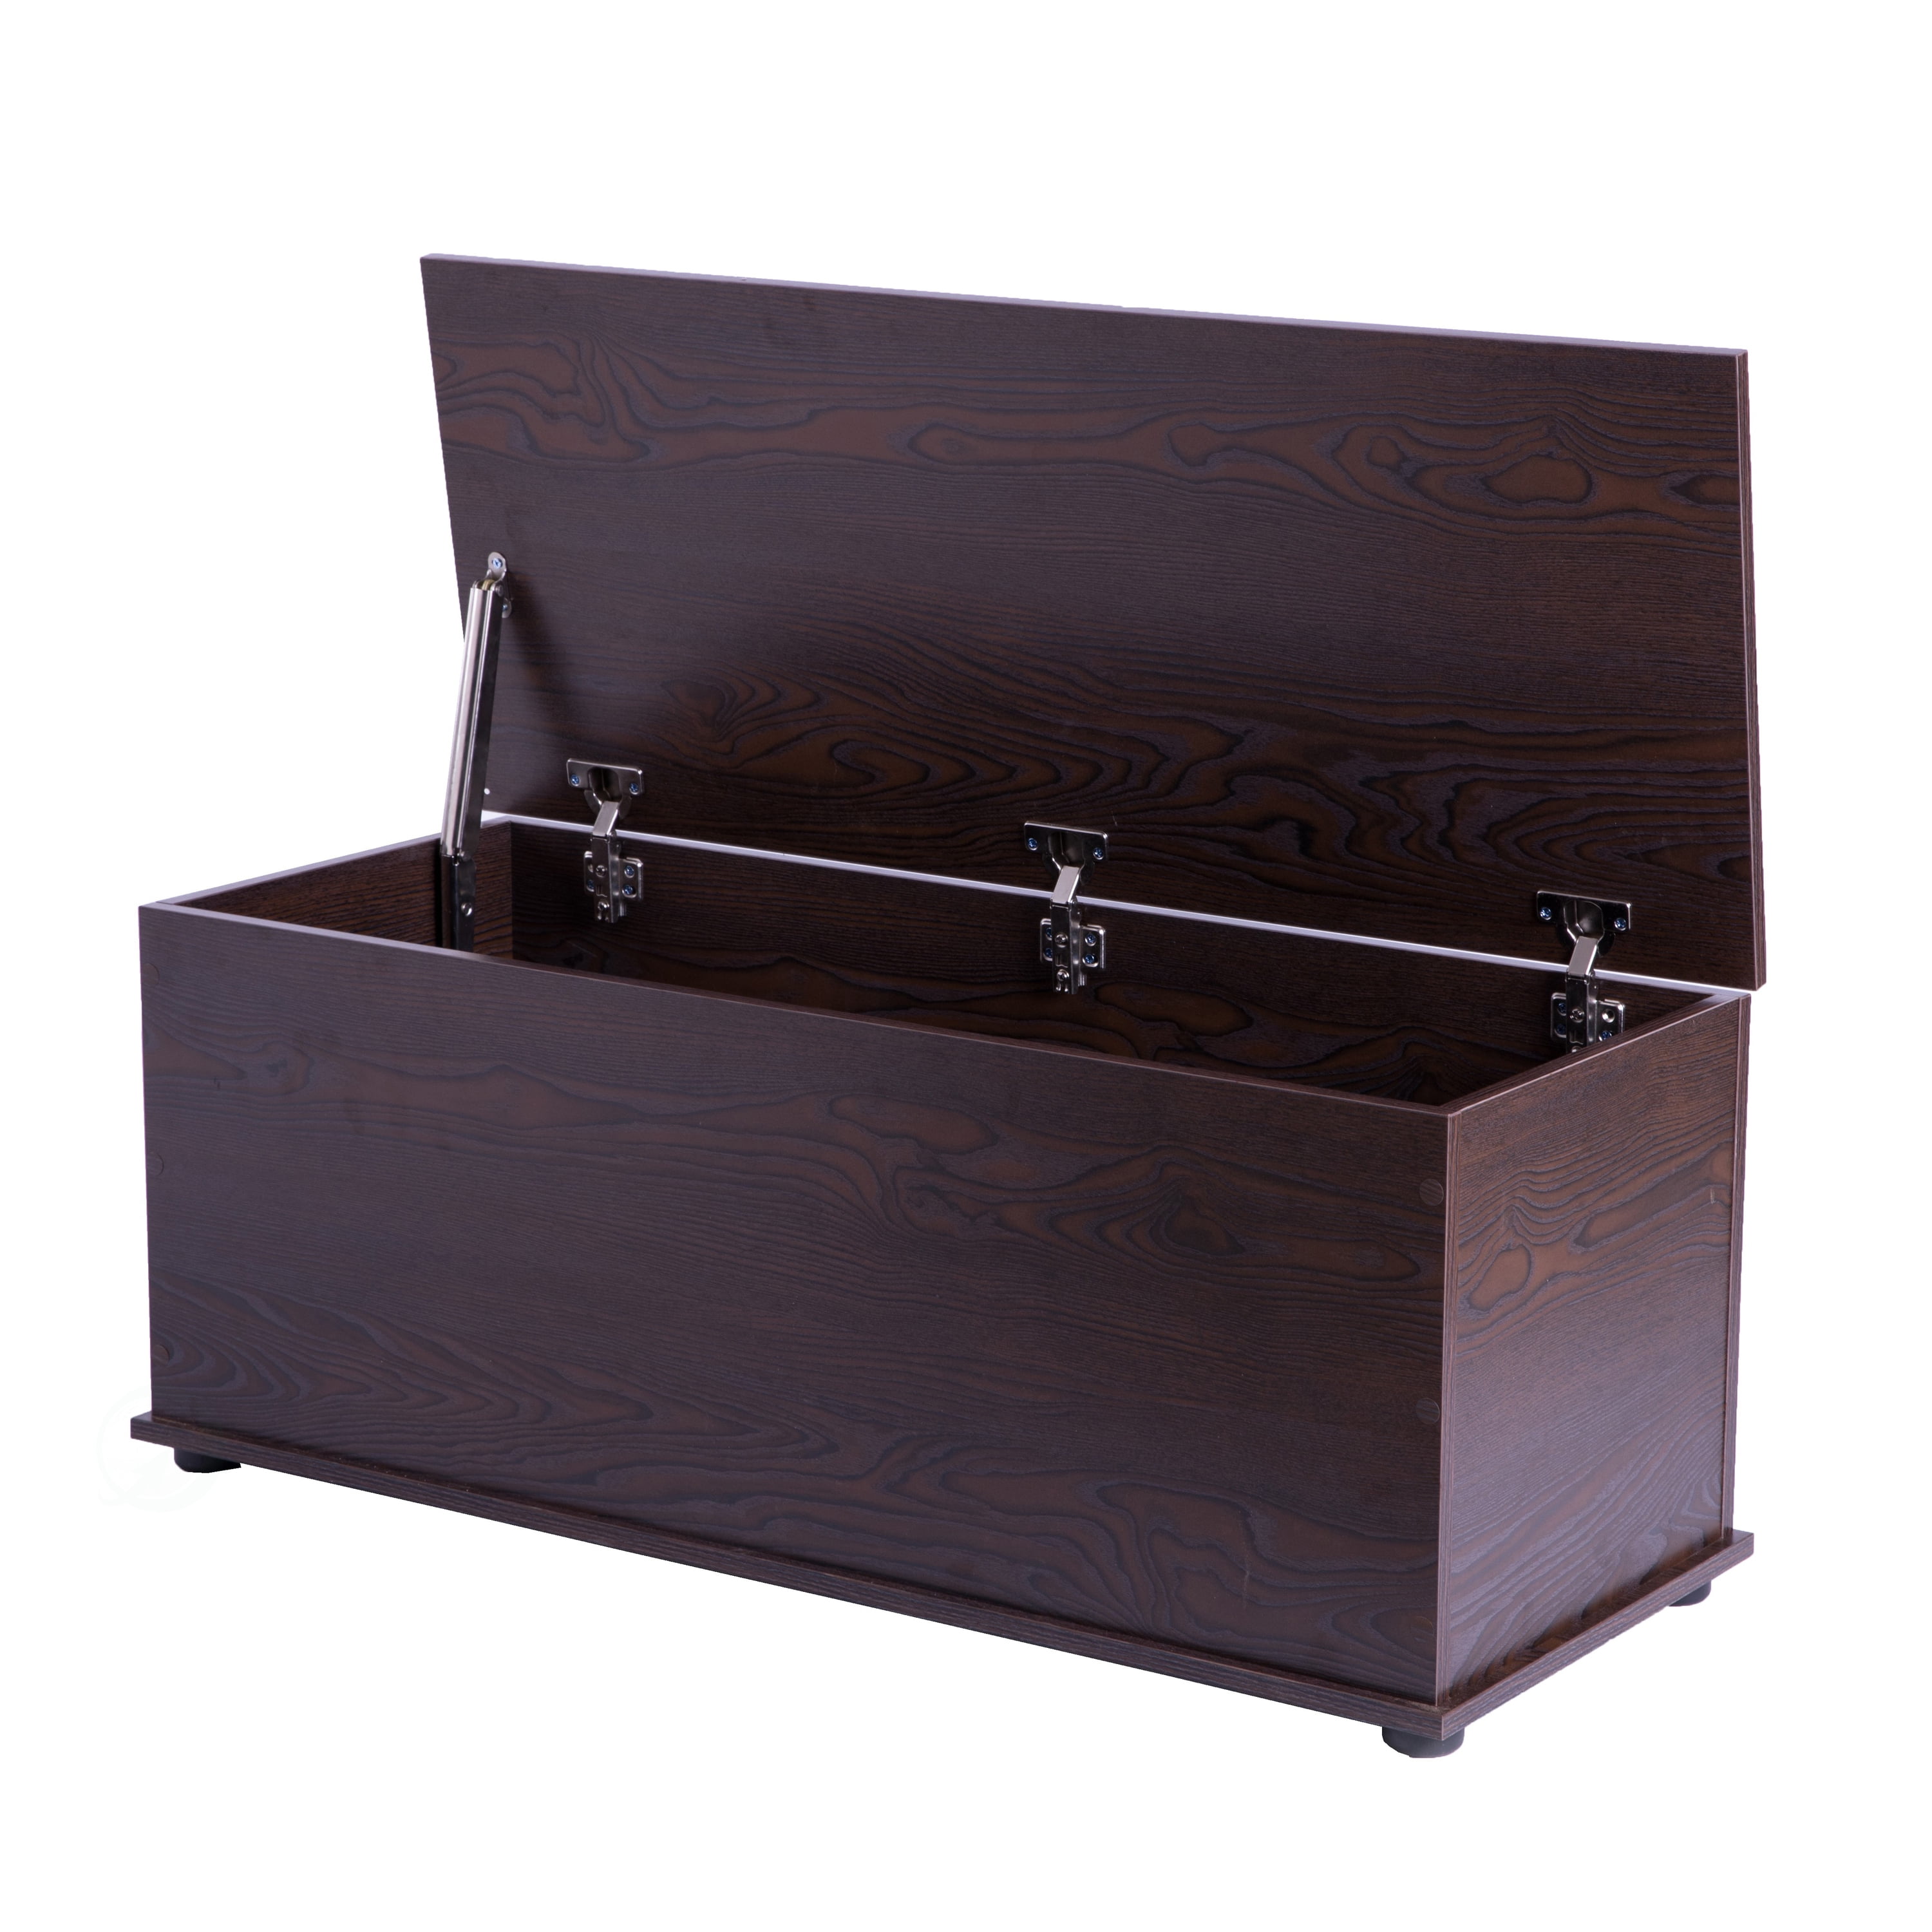 Wooden Storage Box Rustic with Hinged Lid Home Decor Wood Boxes Keepsake  Box brown 14x14x10cm 